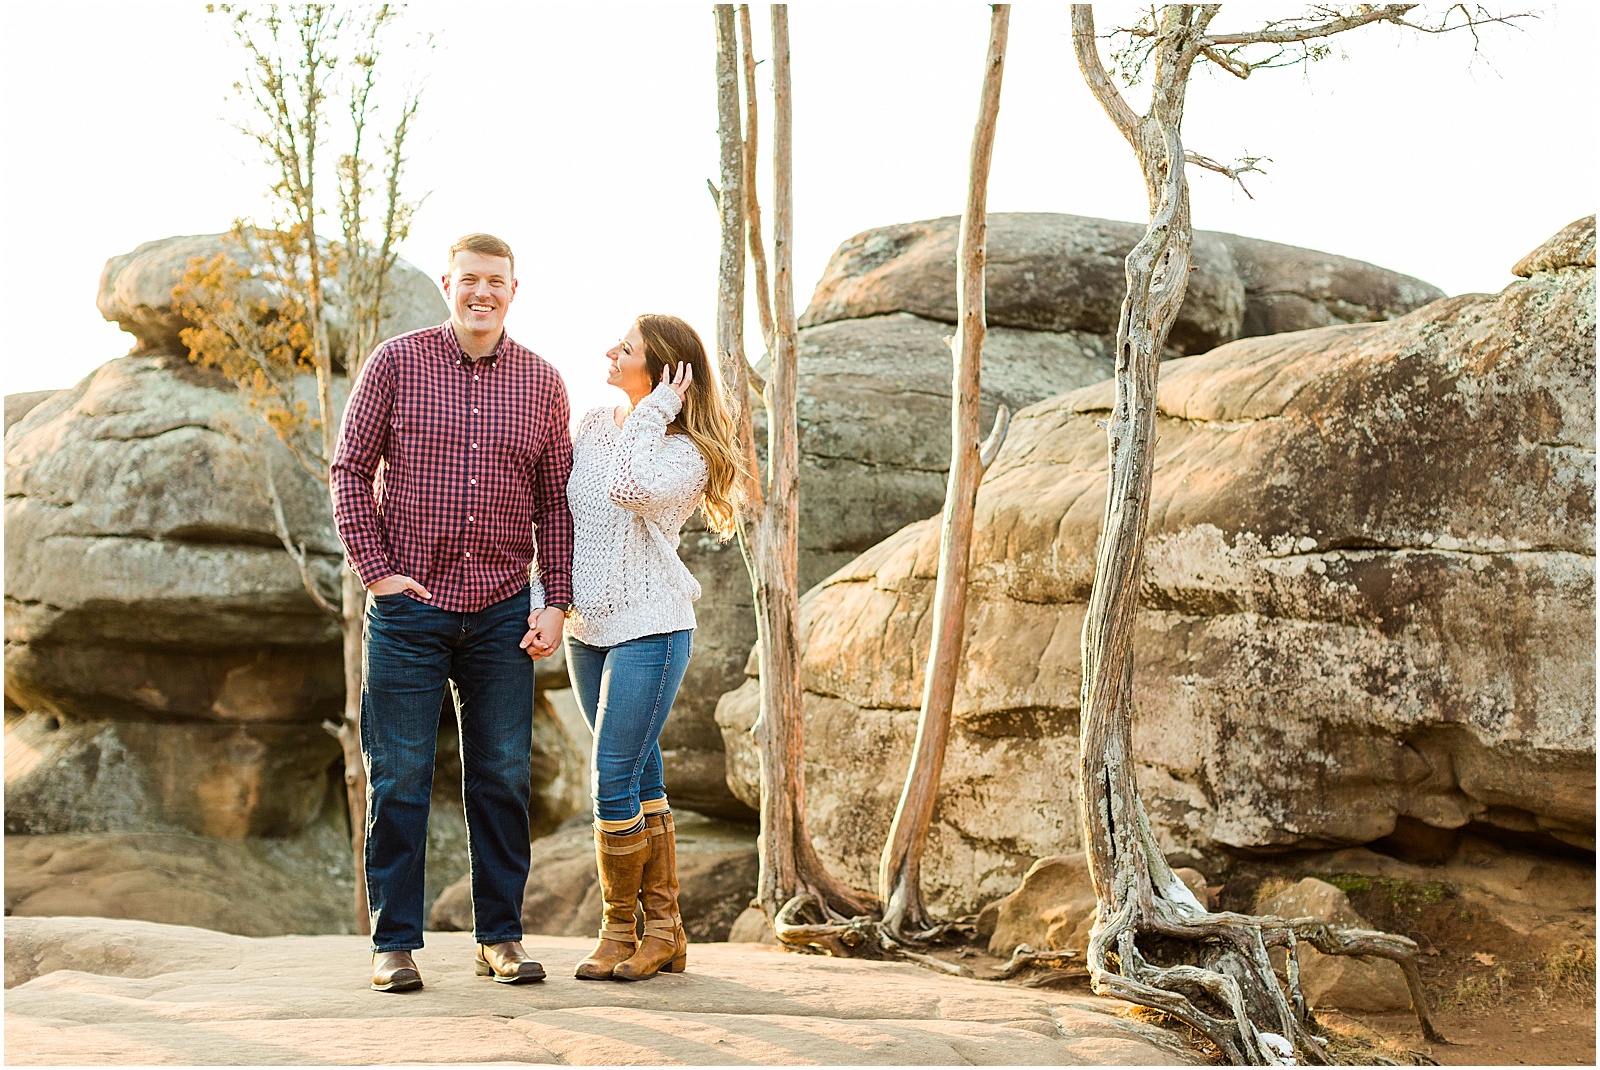 A Sunny Garden of the Gods Engagement Session | Shiloh and Lee | Bret and Brandie Photography062.jpg